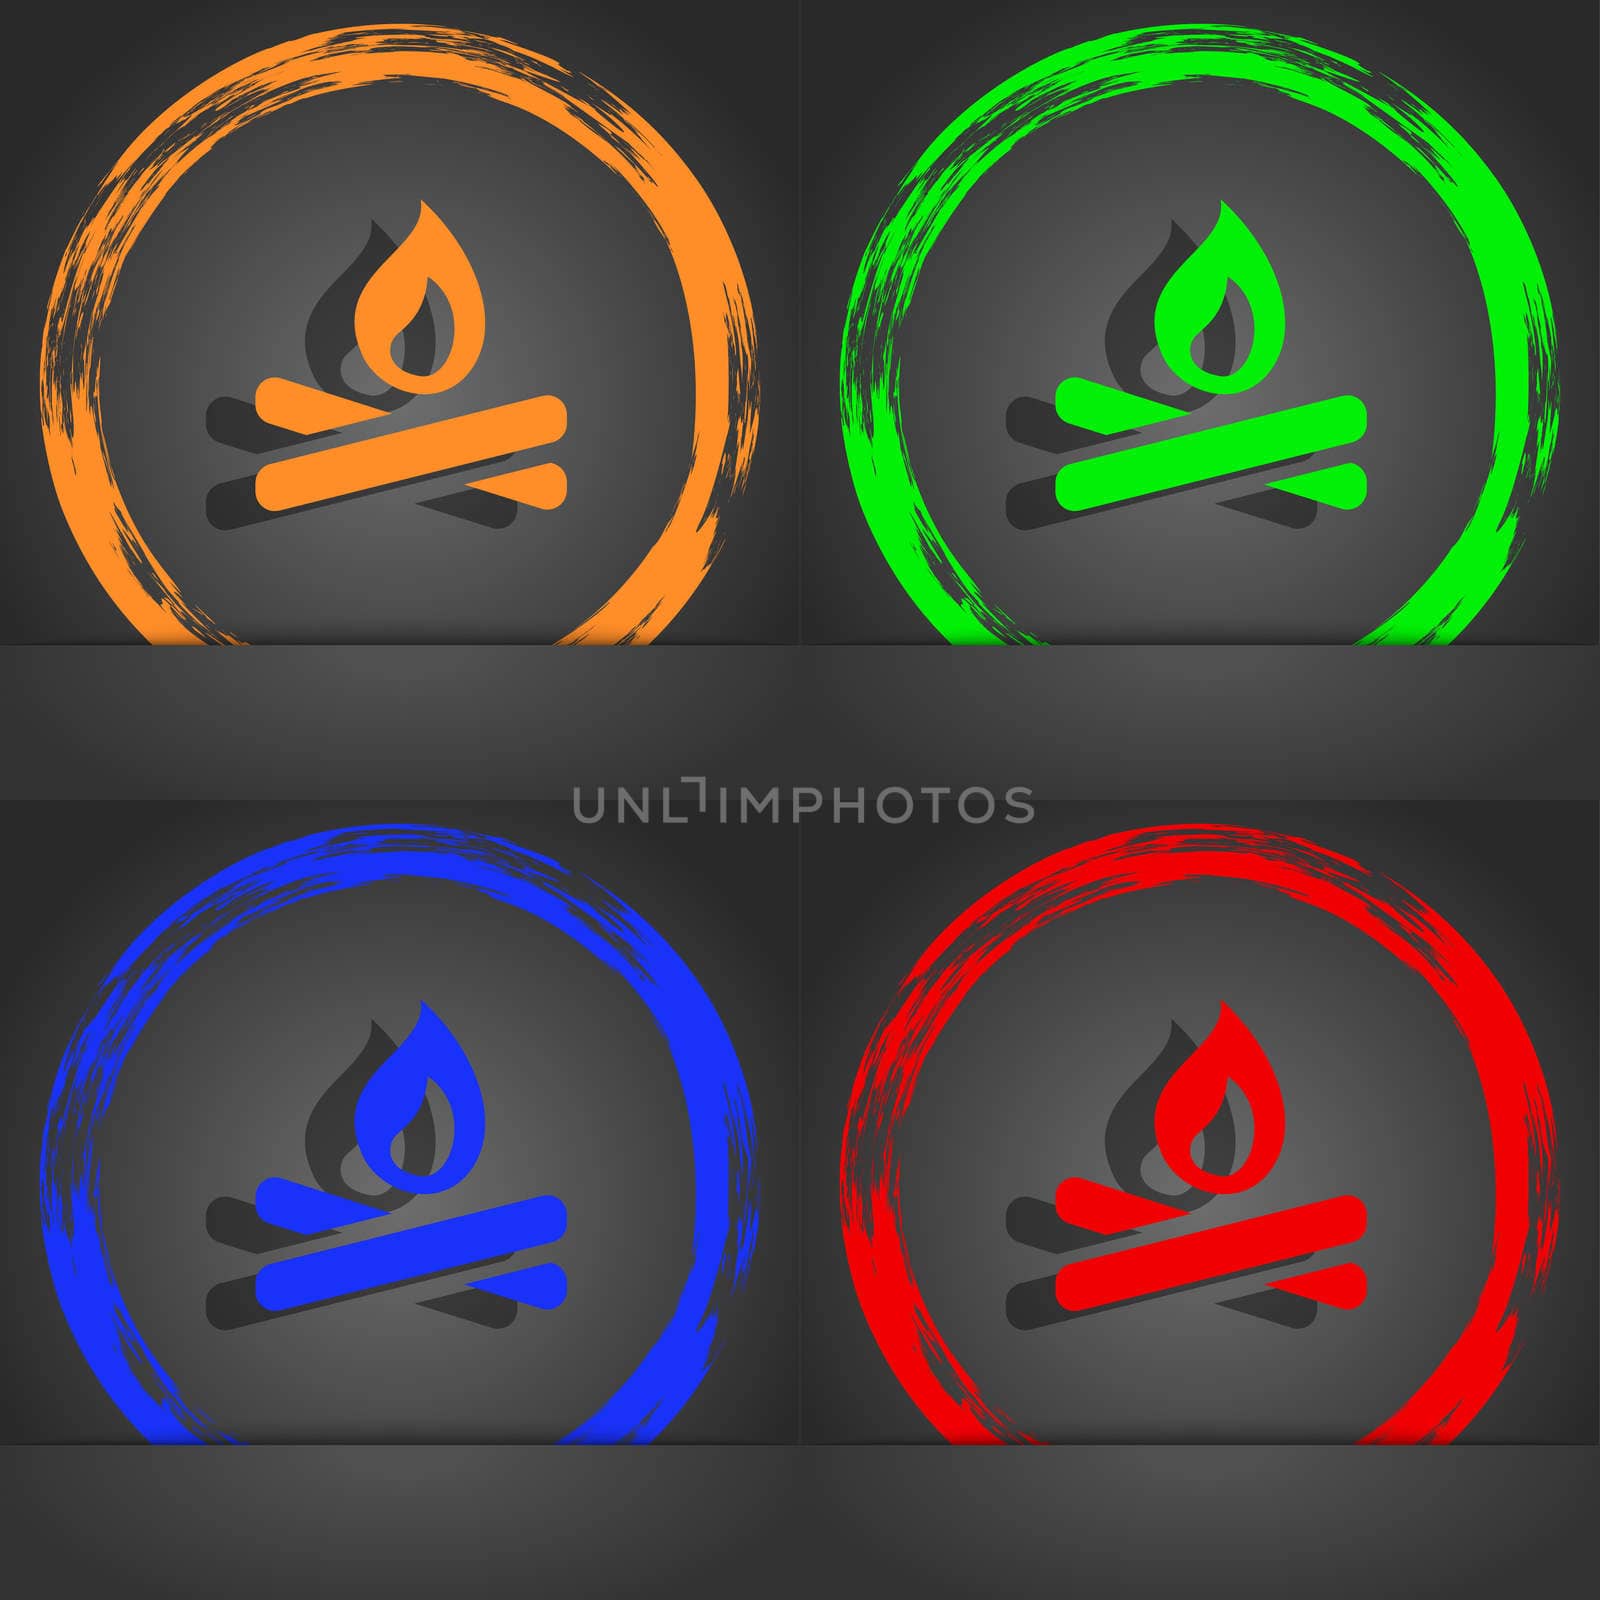 Fire flame icon symbol. Fashionable modern style. In the orange, green, blue, green design. illustration